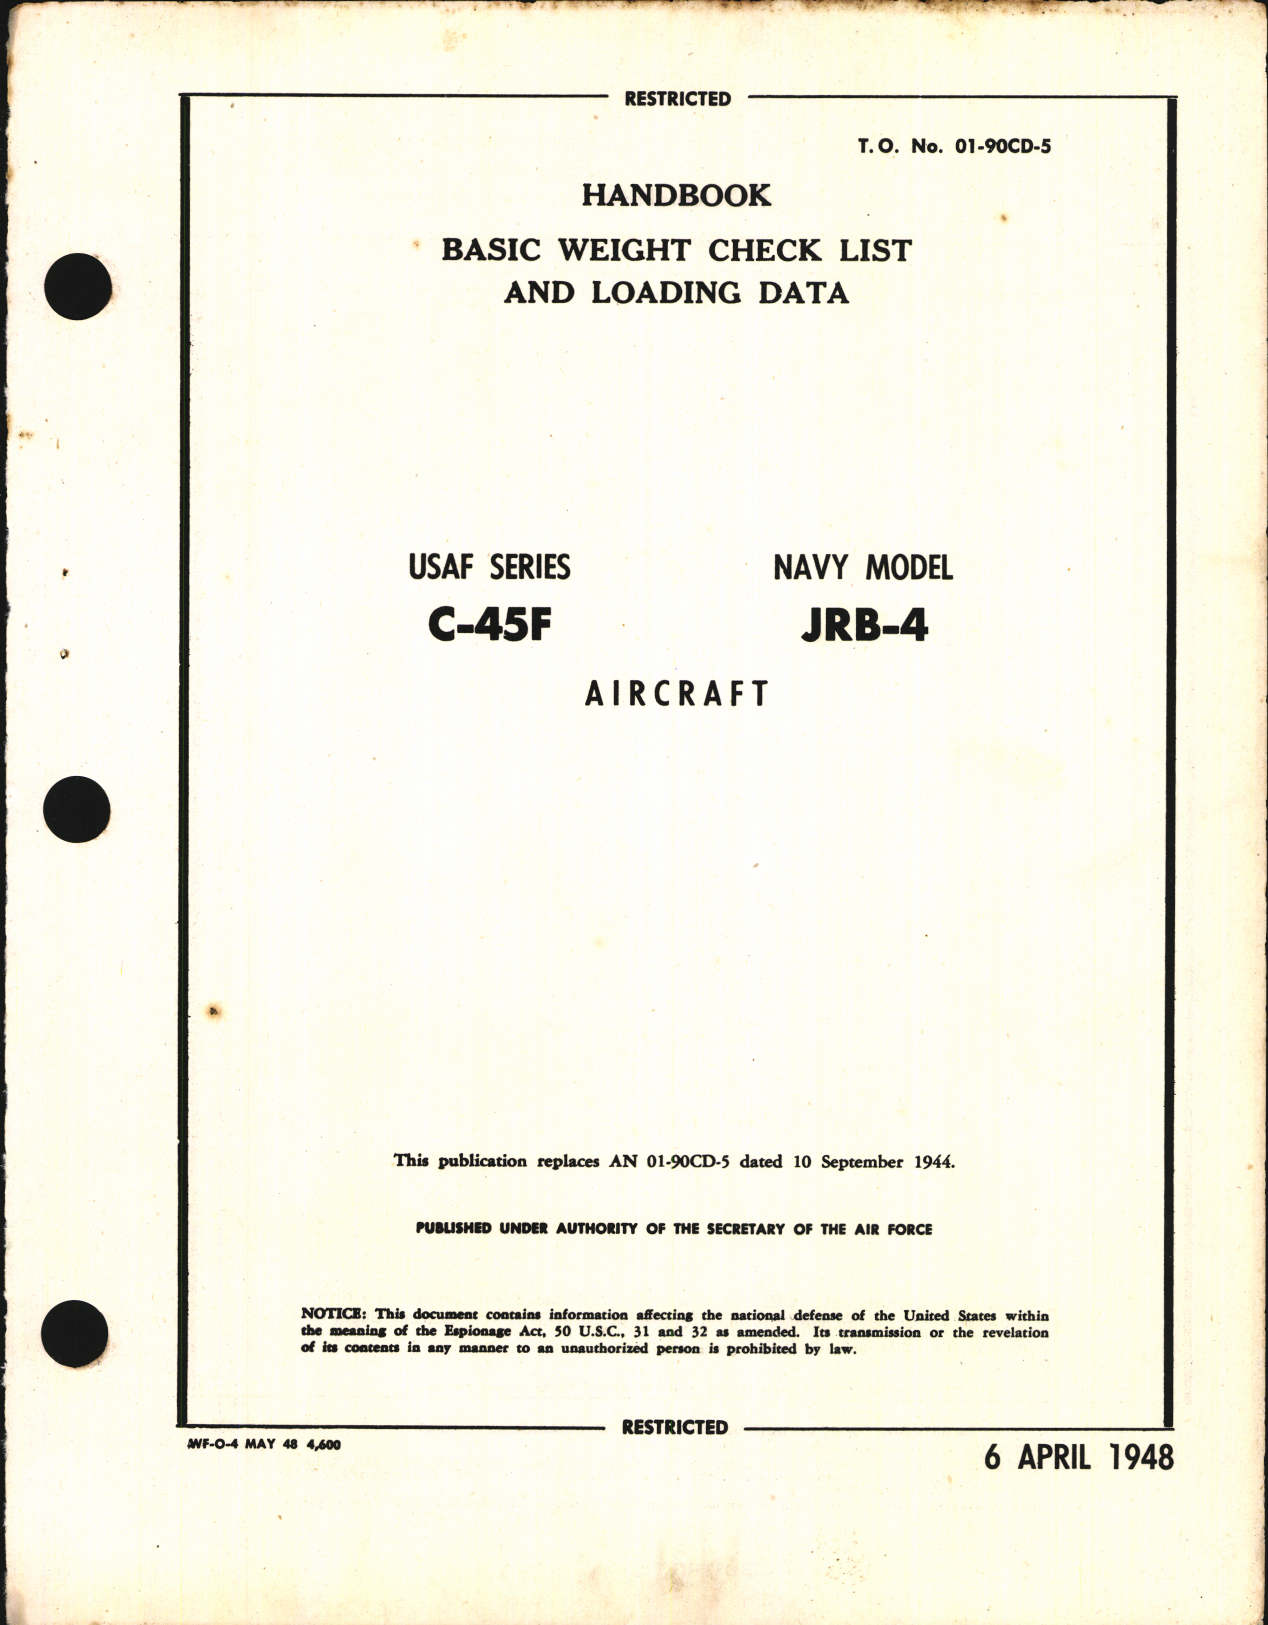 Sample page 1 from AirCorps Library document: Basic Weight Check List and Loading Data for C-45F and JRB-4